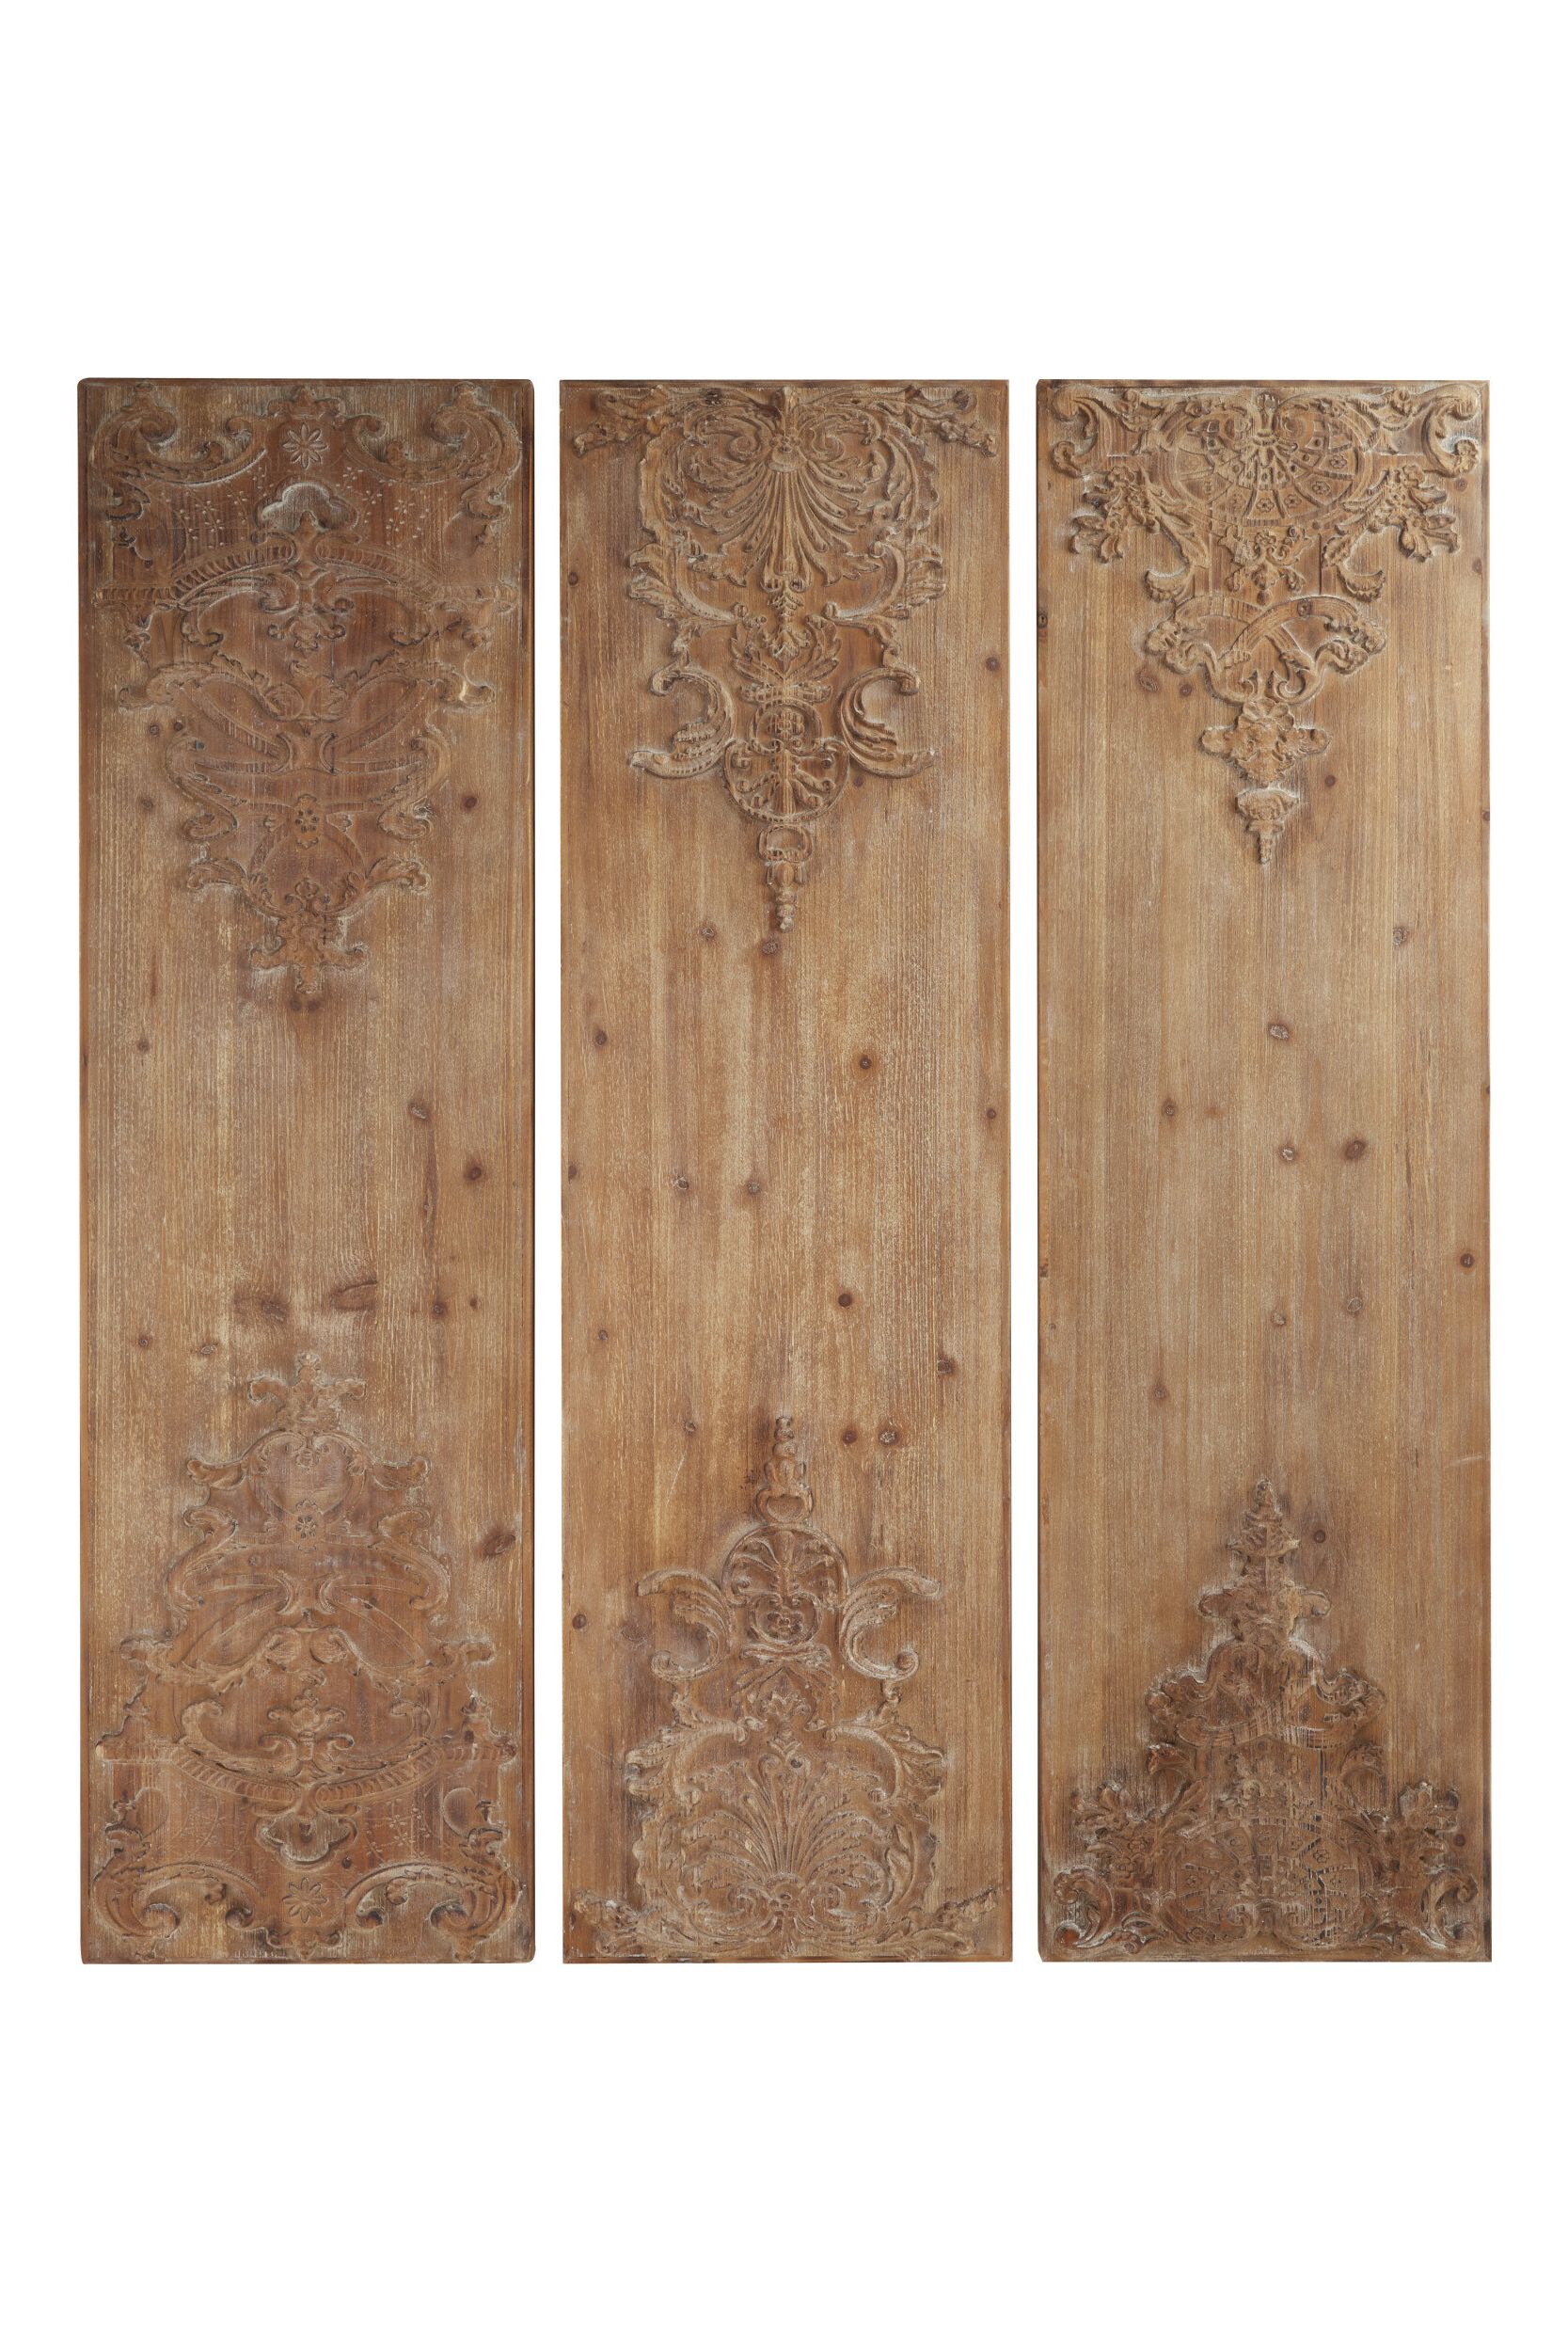 Most Up To Date 3 Piece Hand Carved Natural Wood Panels With Antique And Acanthus Carvings  Wall Décor Set Pertaining To 3 Piece Carved Ornate Wall Décor Set (View 8 of 20)